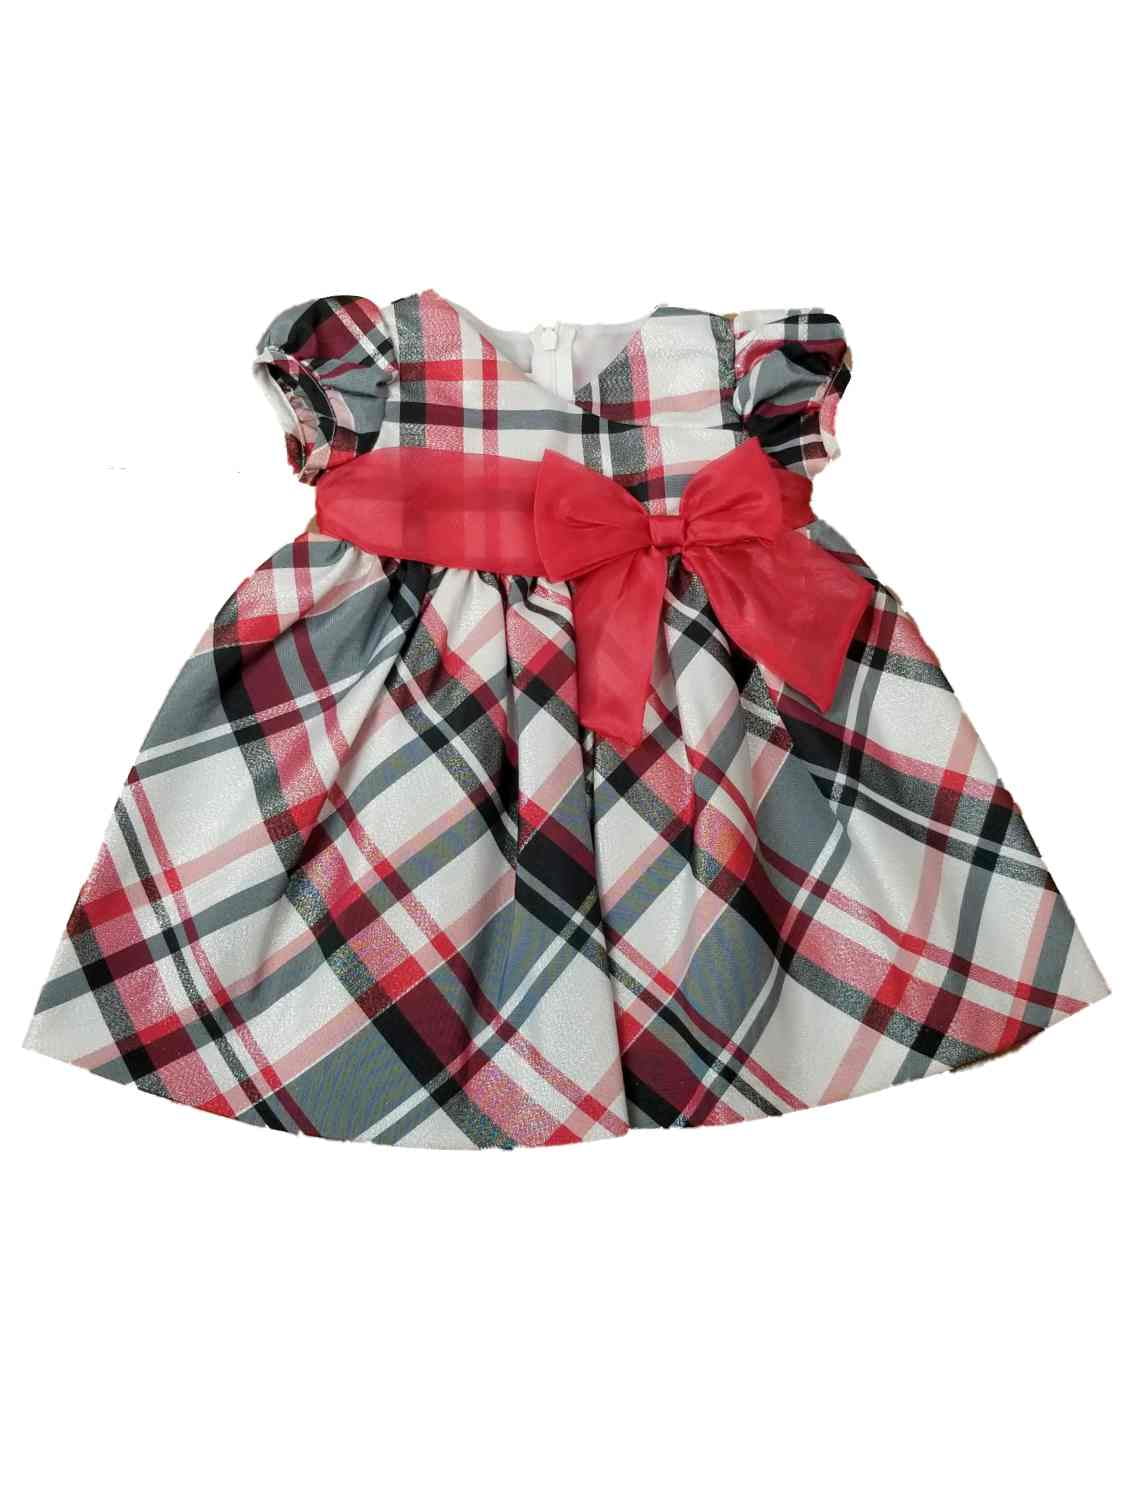 CARTERS DRESS GIRLS SATIN VELVET RED BLACK BABY XMAS PARTY HOLIDAY WEDDING BOW 